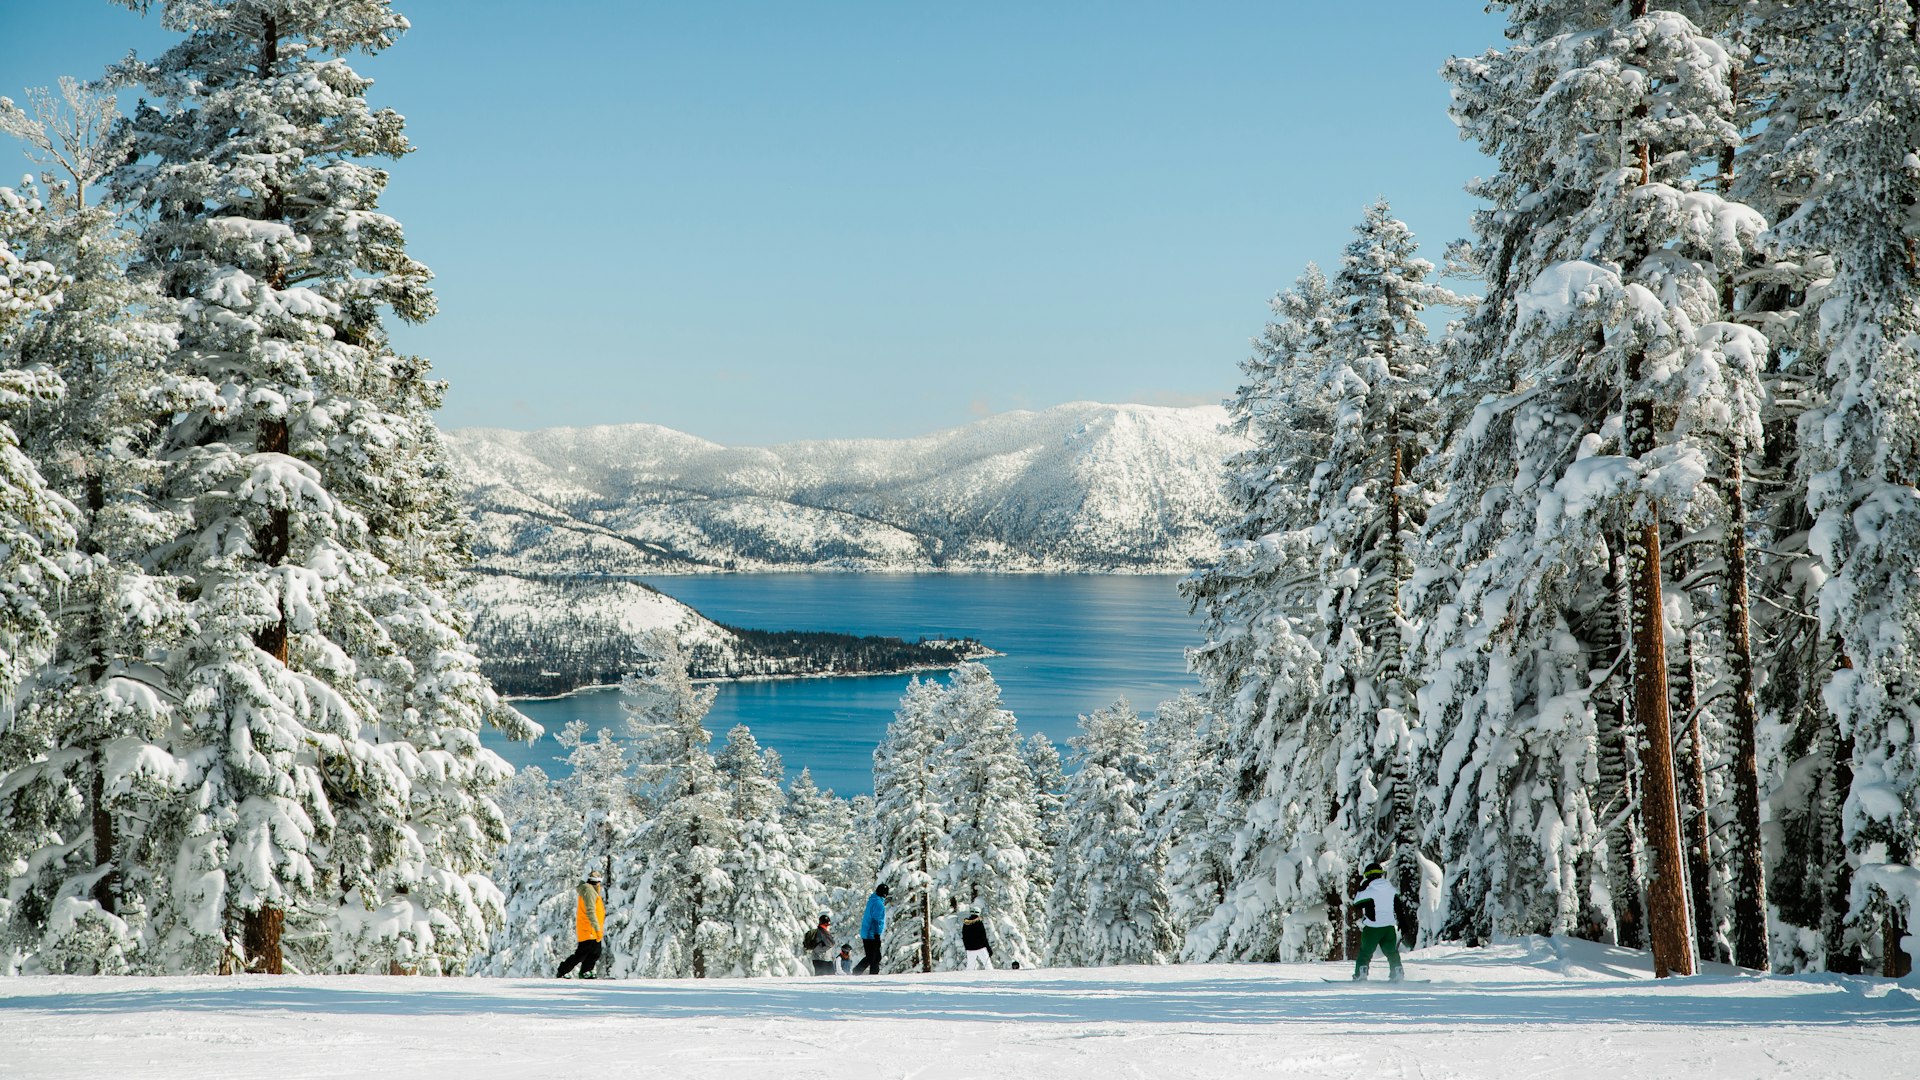 People skiing on top of a mountain with view of Lake Tahoe on a snowy winter day, with trees fully cover by fresh snow